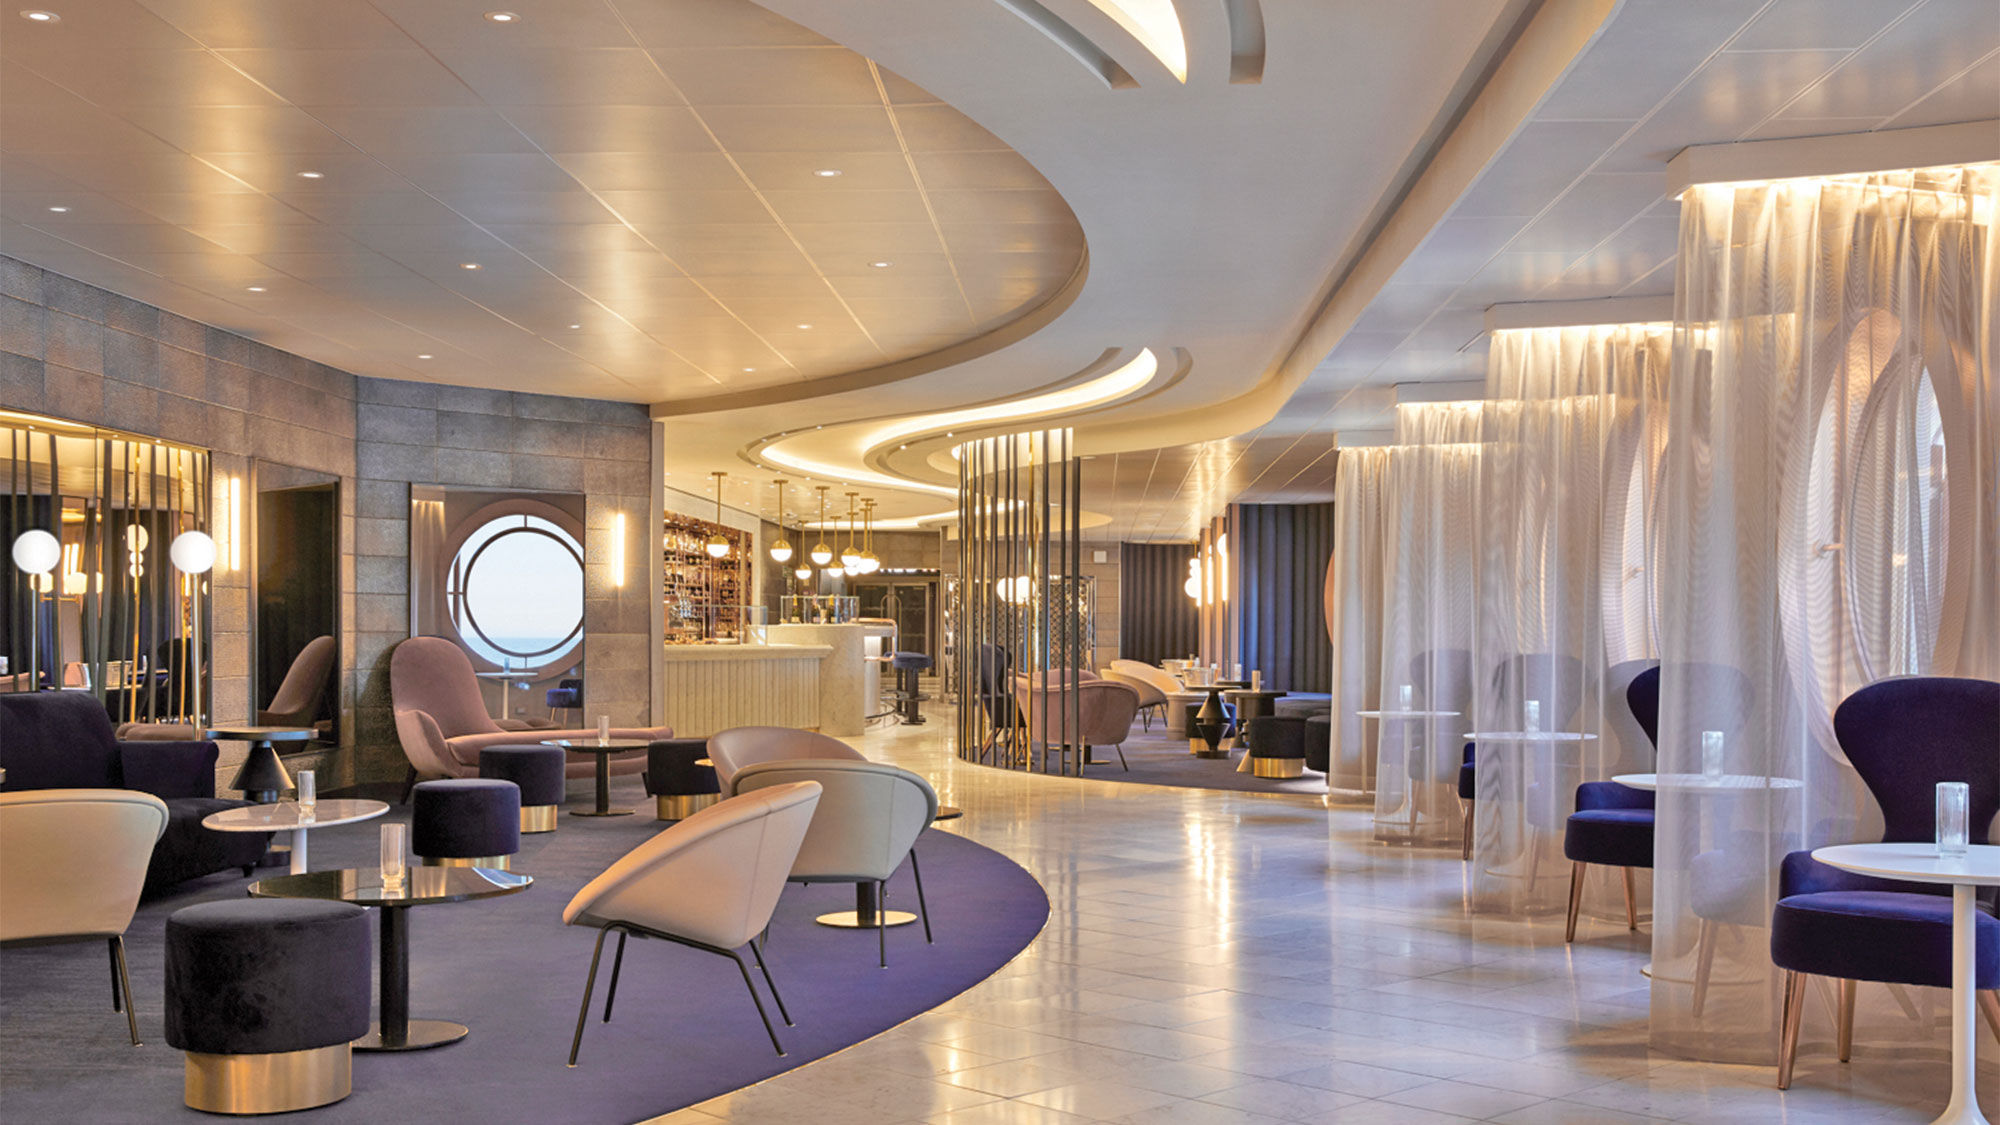 From stem to stern, Virgin Voyages' Scarlet Lady exudes style, modernity and class